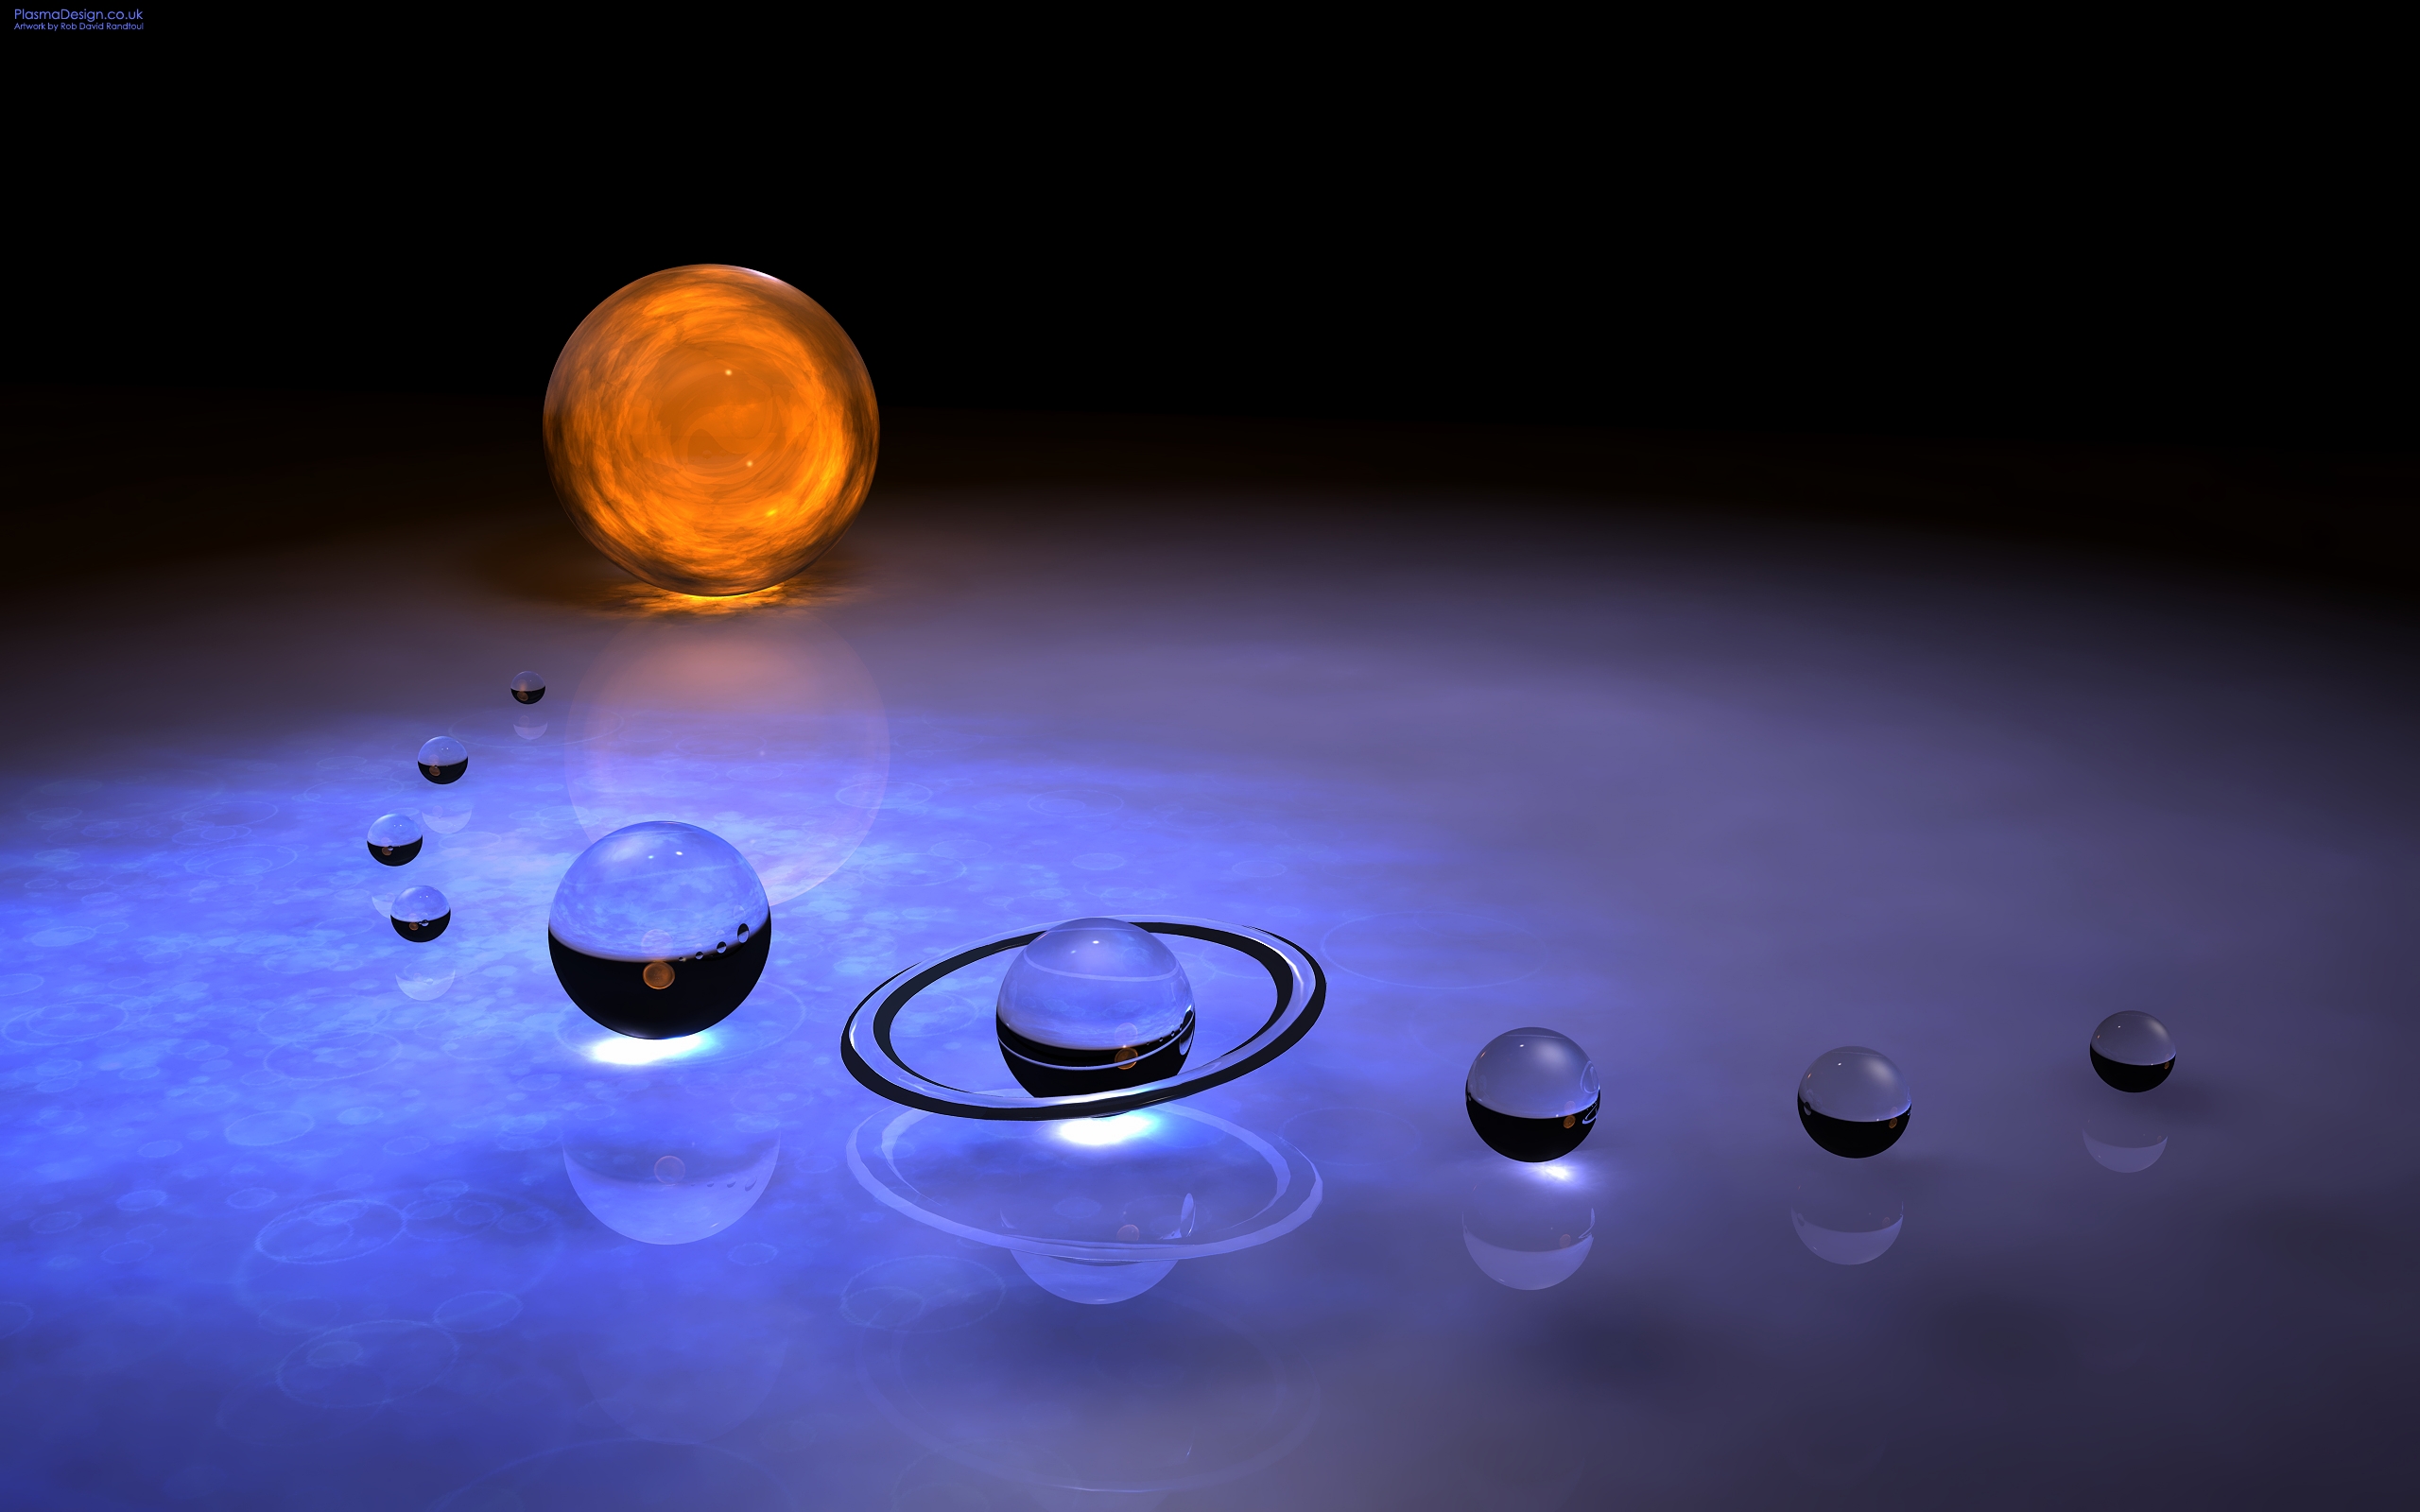 General 2560x1600 space digital art artwork abstract ball CGI space art planet planetary rings reflection colorful Sun